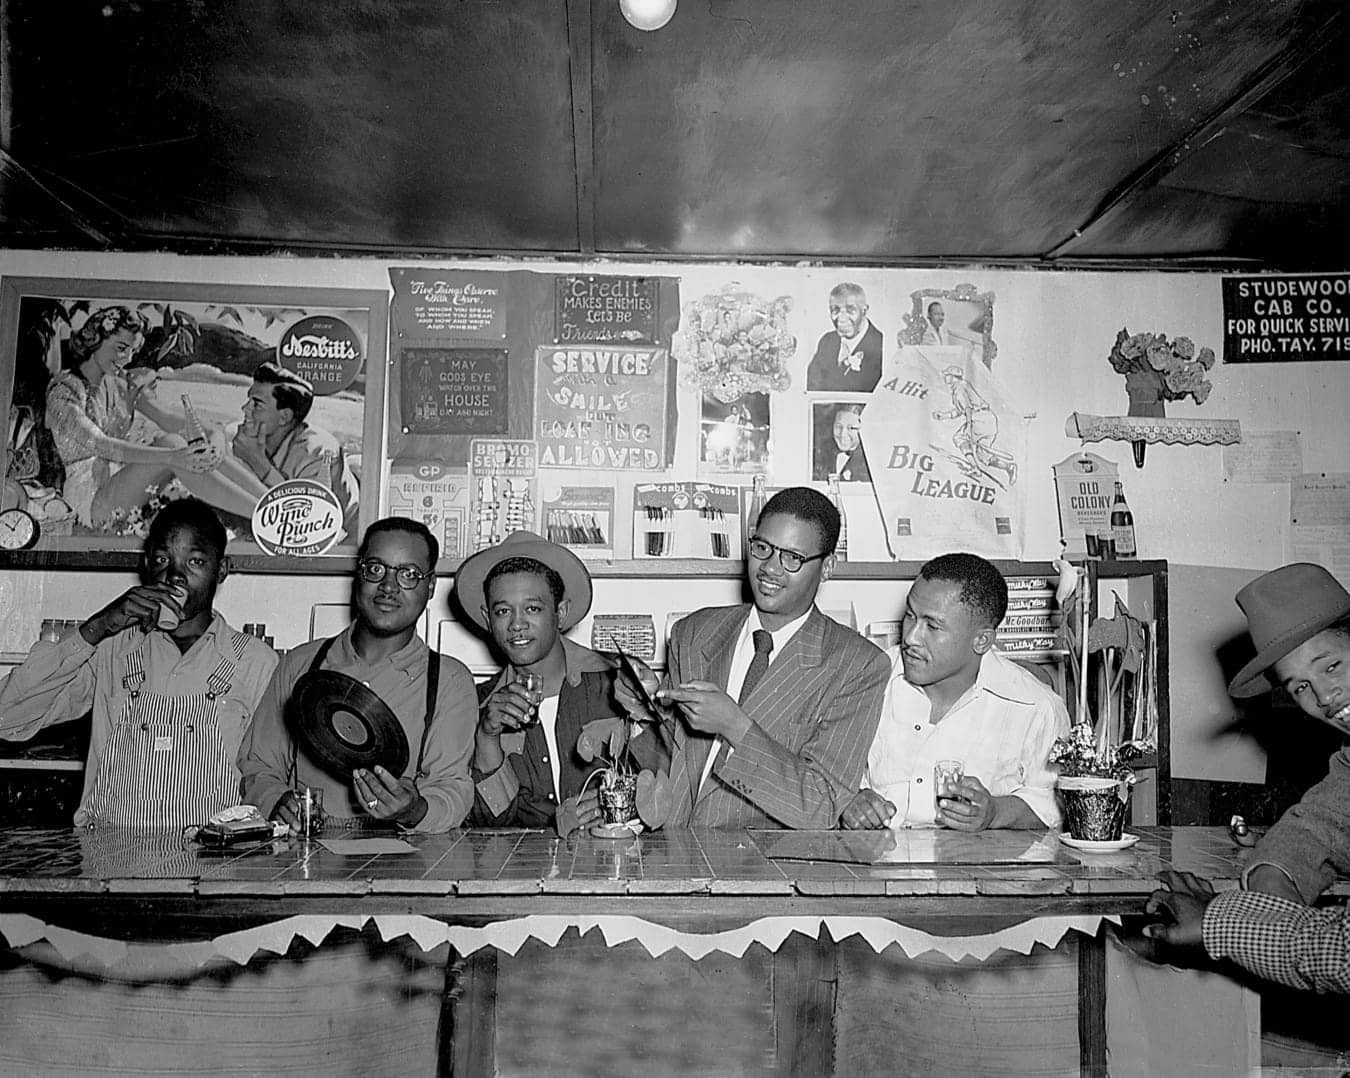 Record-release-celebration-Fillmore-diner-early-1950s-by-Steve-Jackson-Jr.-‘Harlem-of-the-West, San Francisco’s and McCormack Baron Salazar’s criminal neglect of Plaza East Apartments, Local News & Views 